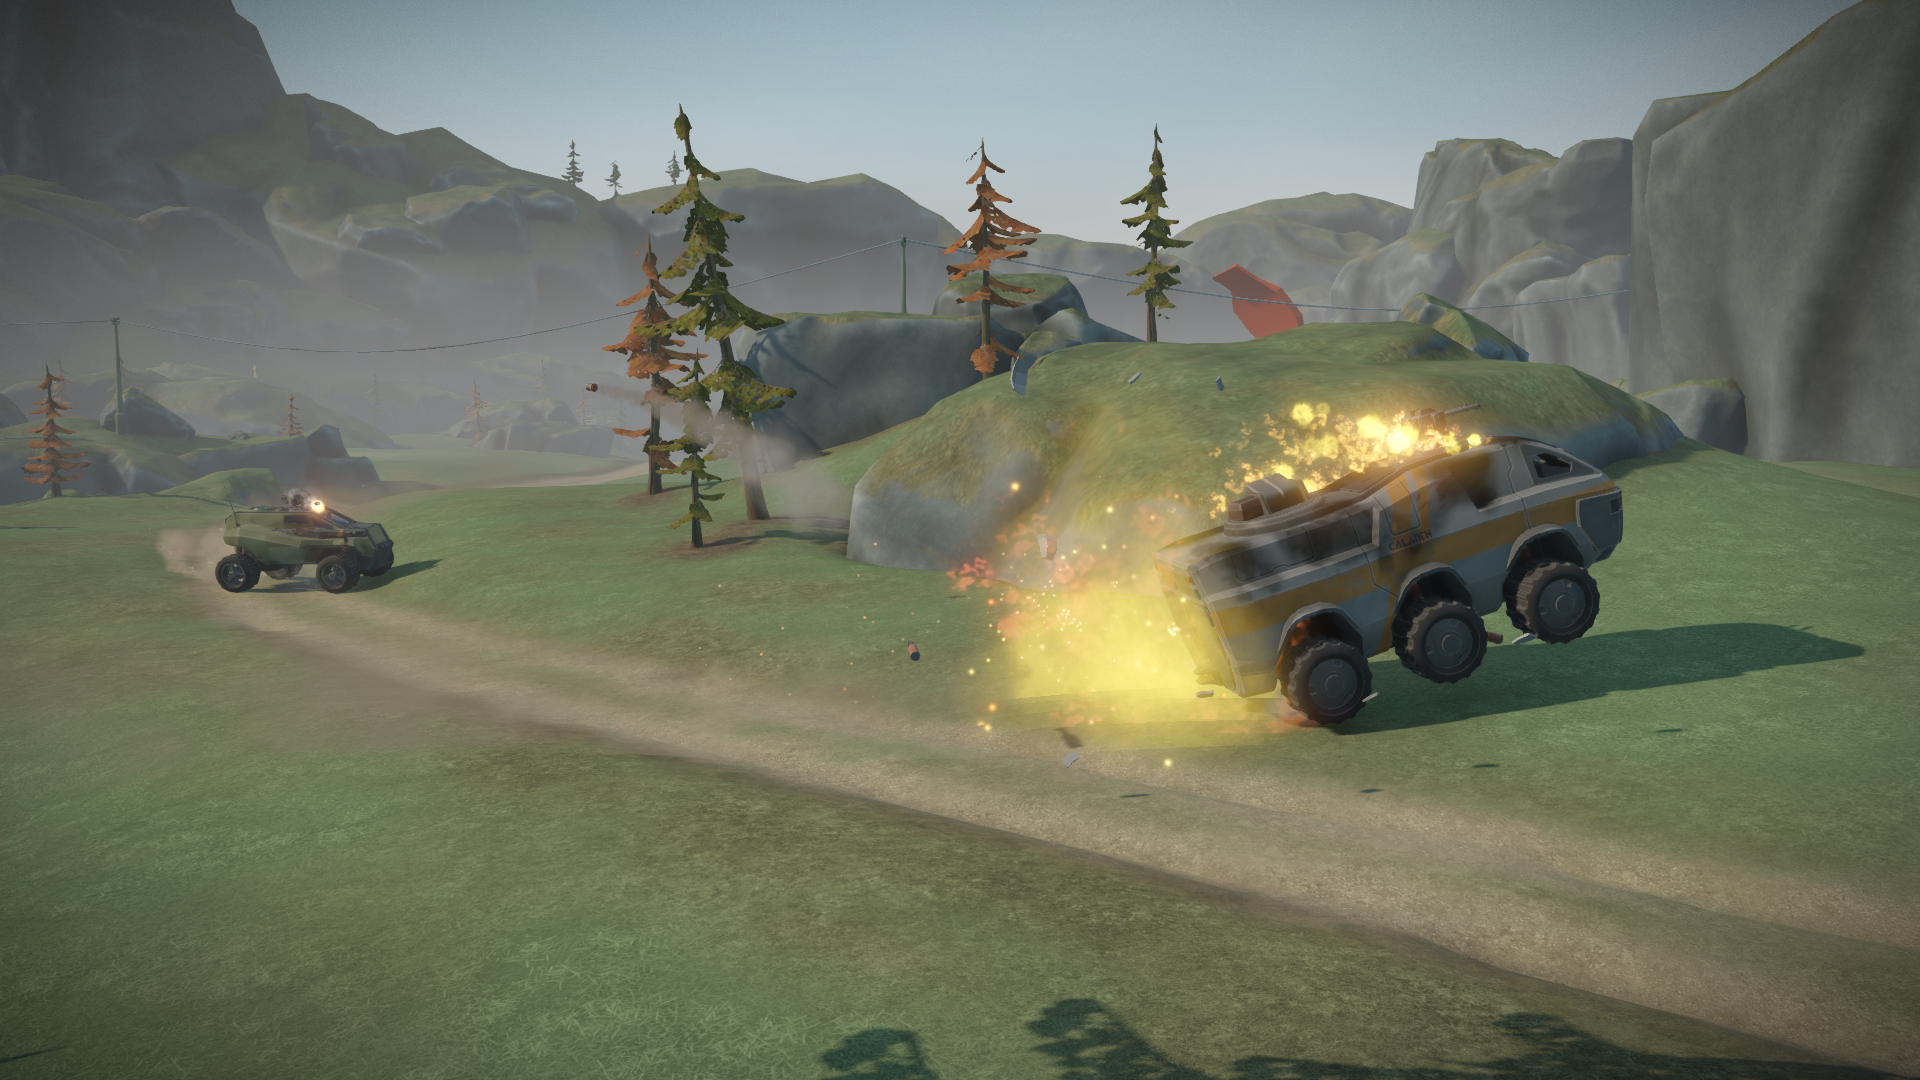 A Lancer firing on a Combat Badger, causing it to explode. The Combat Badger manages to launch a grenade towards the Lancer though. Will either one survive?